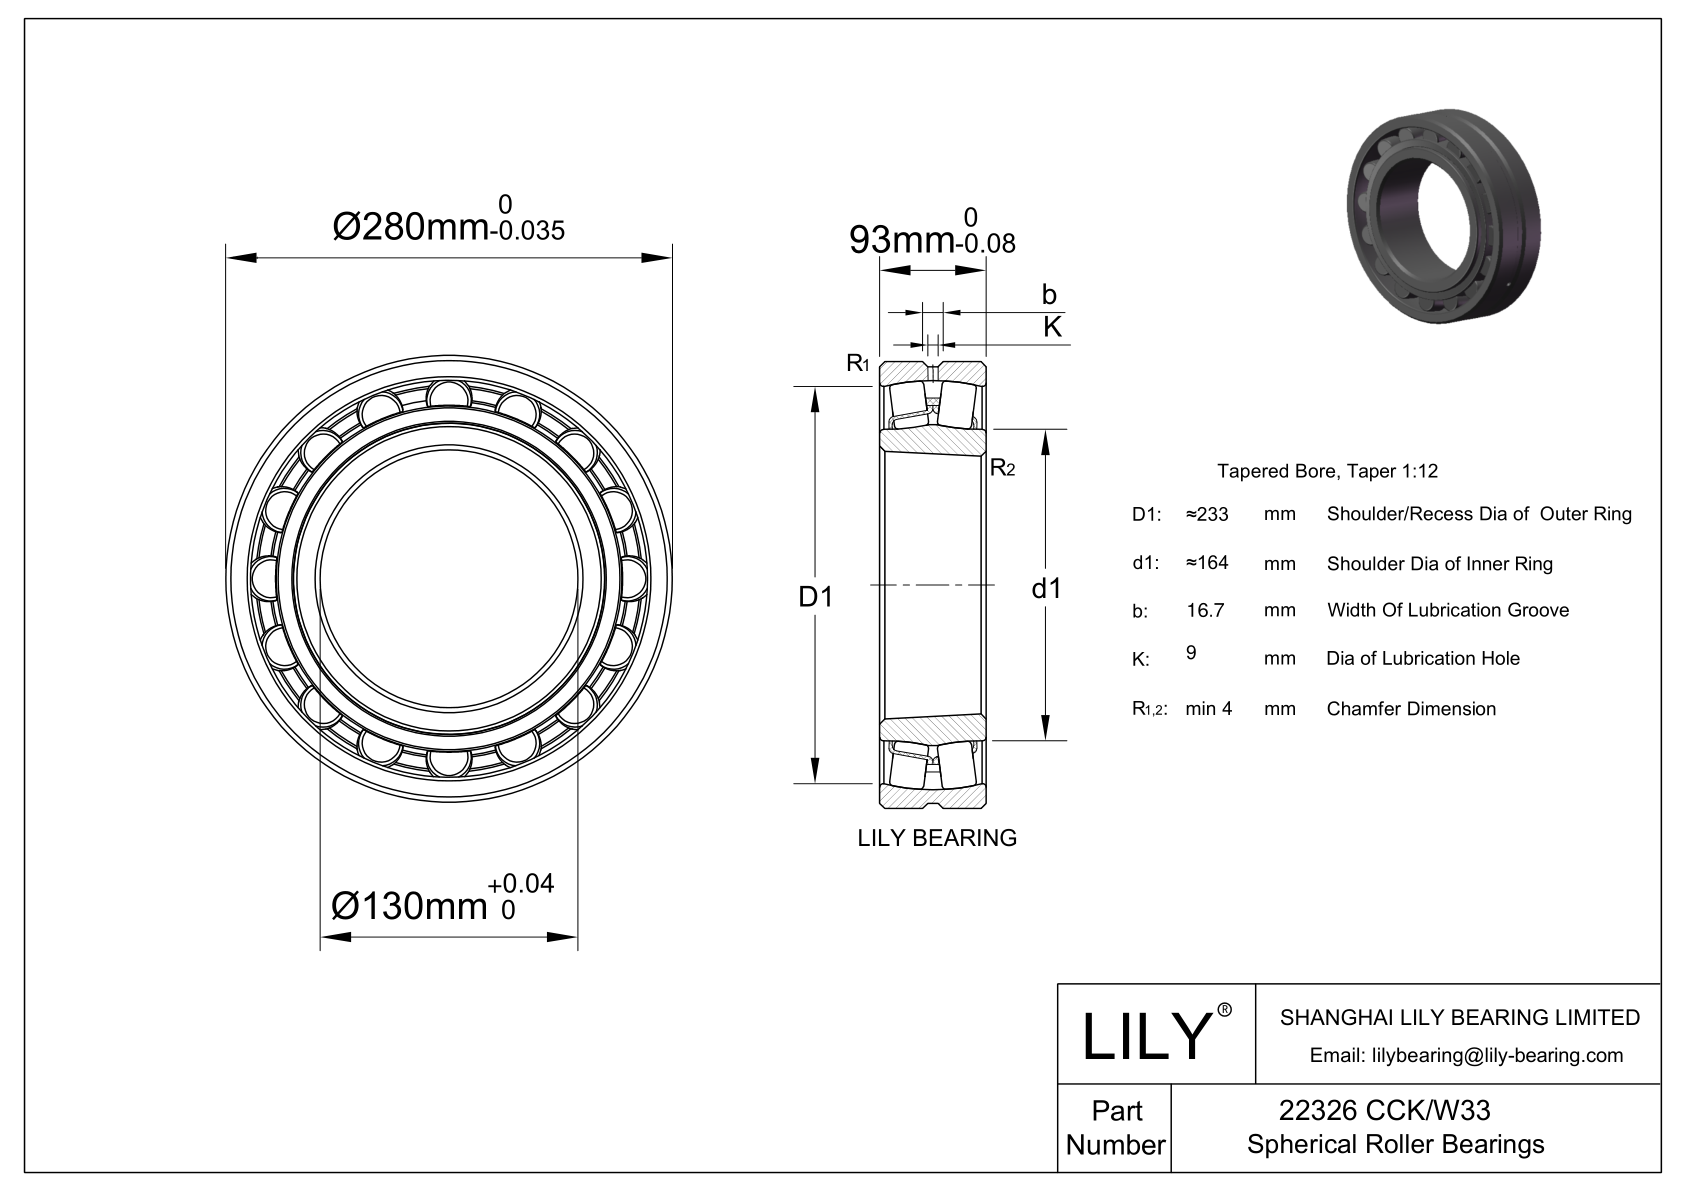 22326 CCK/W33 Double Row Spherical Roller Bearing cad drawing